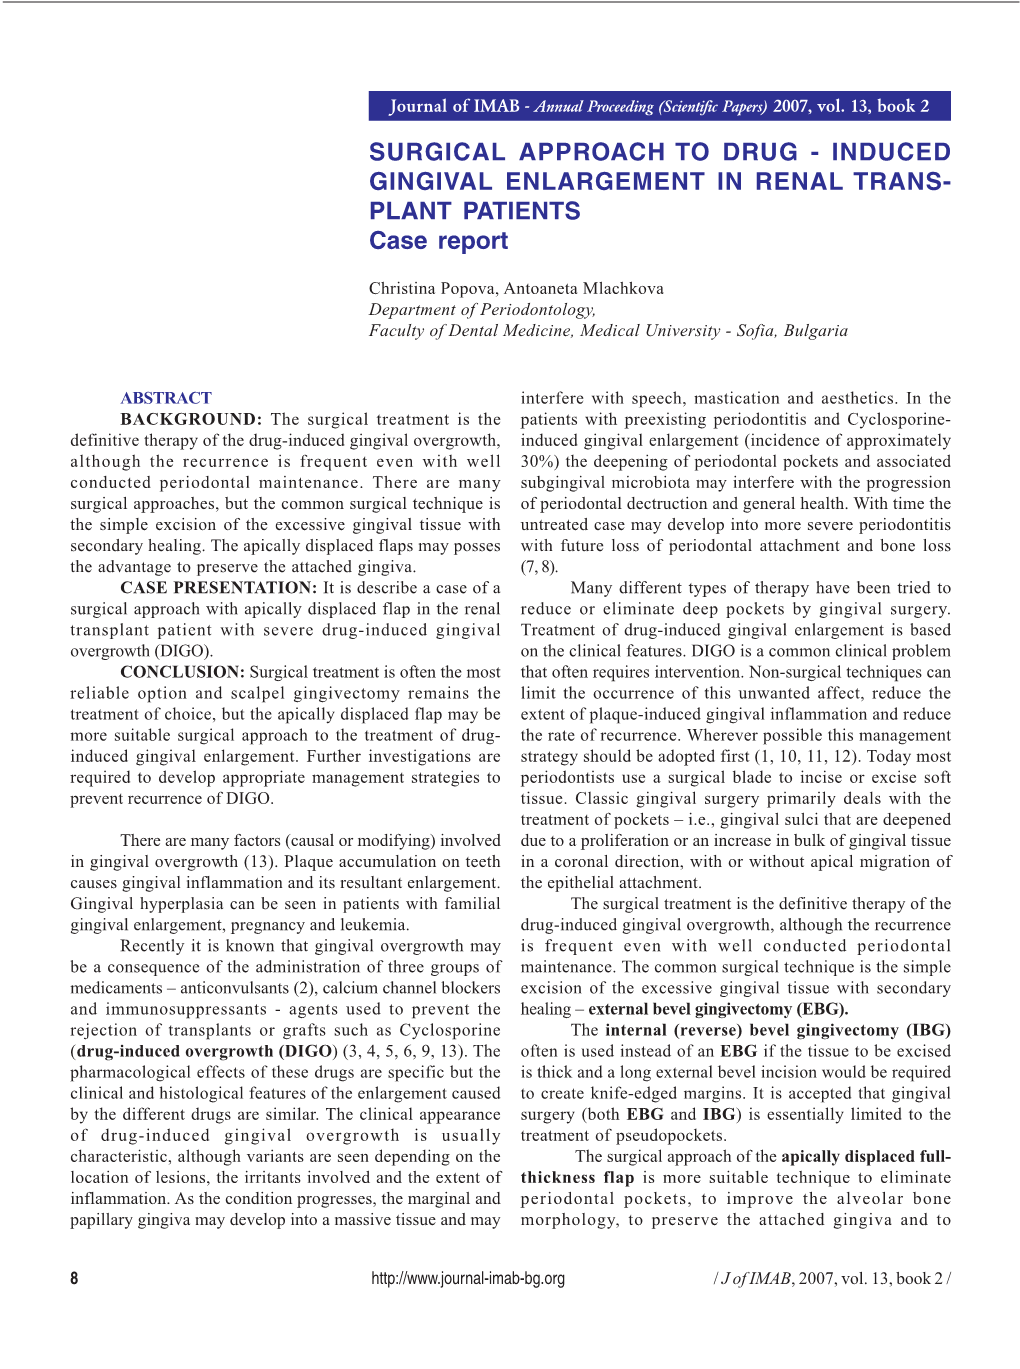 INDUCED GINGIVAL ENLARGEMENT in RENAL TRANS- PLANT PATIENTS Case Report